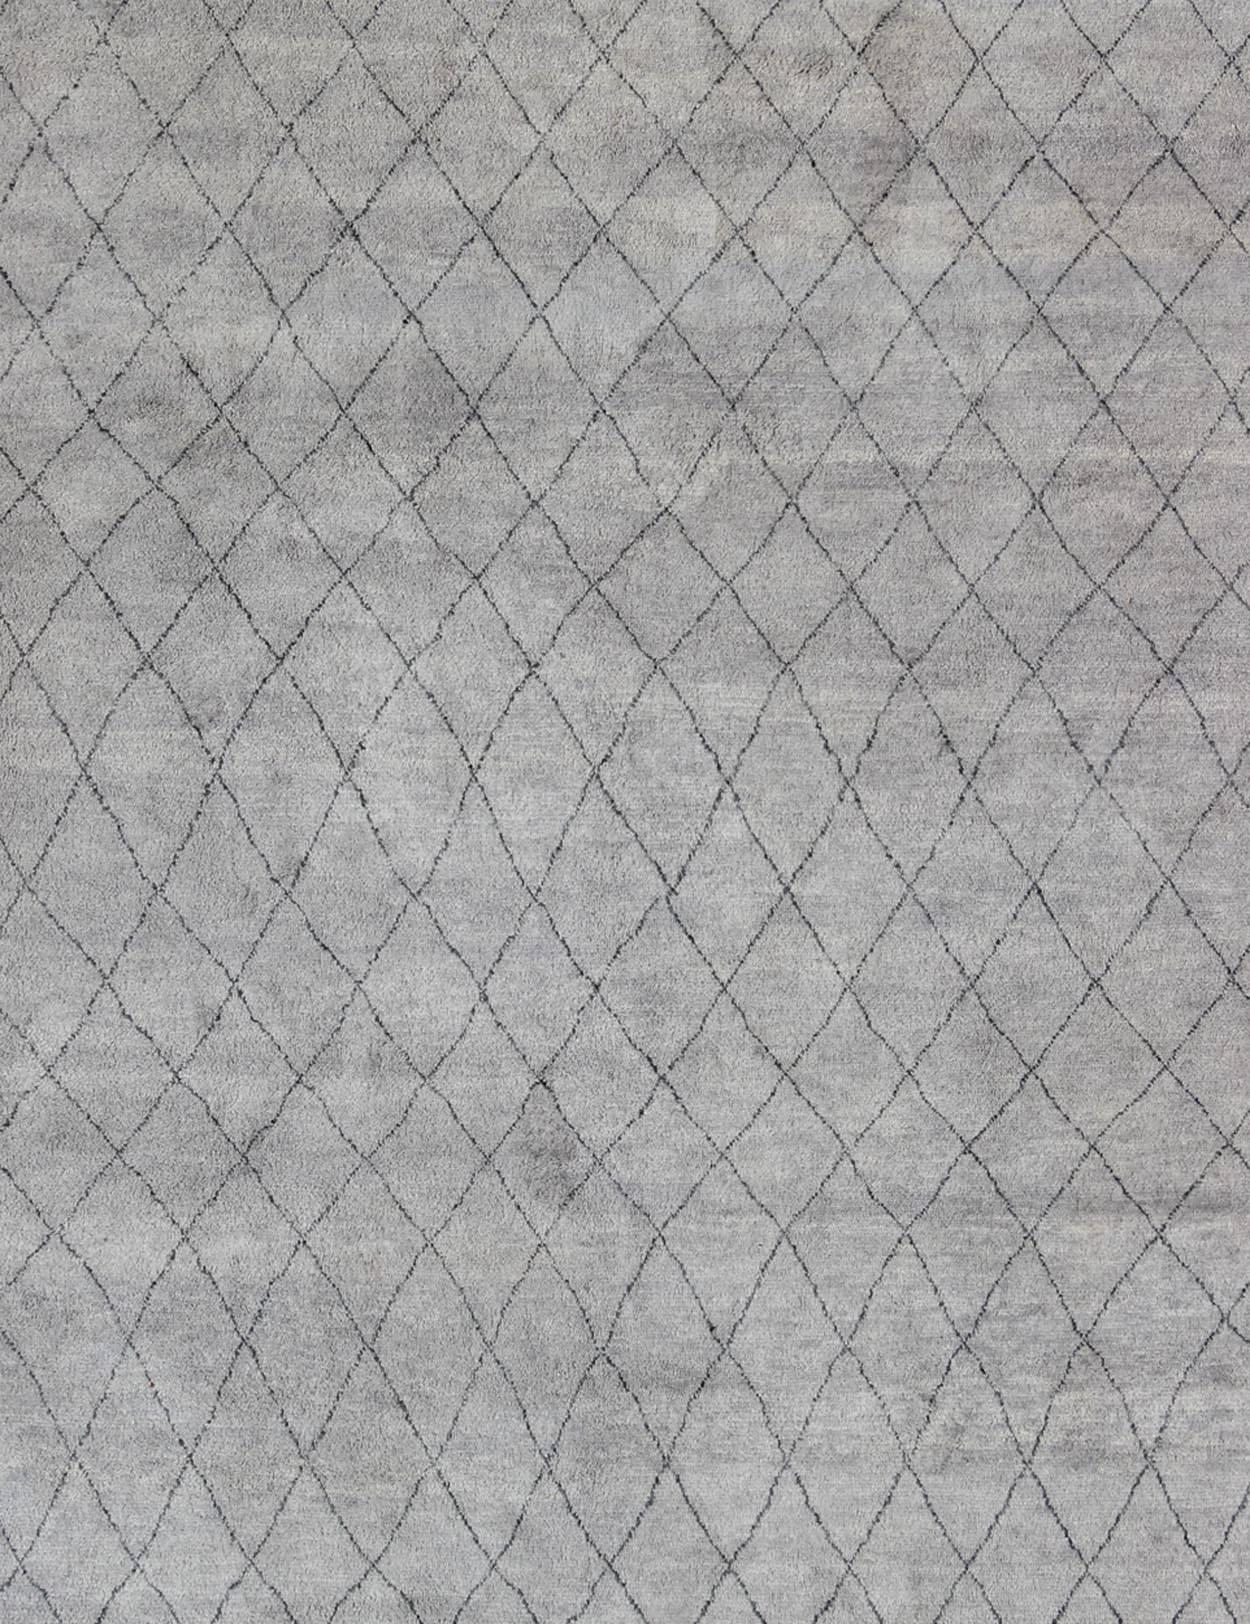 Tribal Modern Moroccan Rug with All-Over Diamond Design in Charcoal and Gray